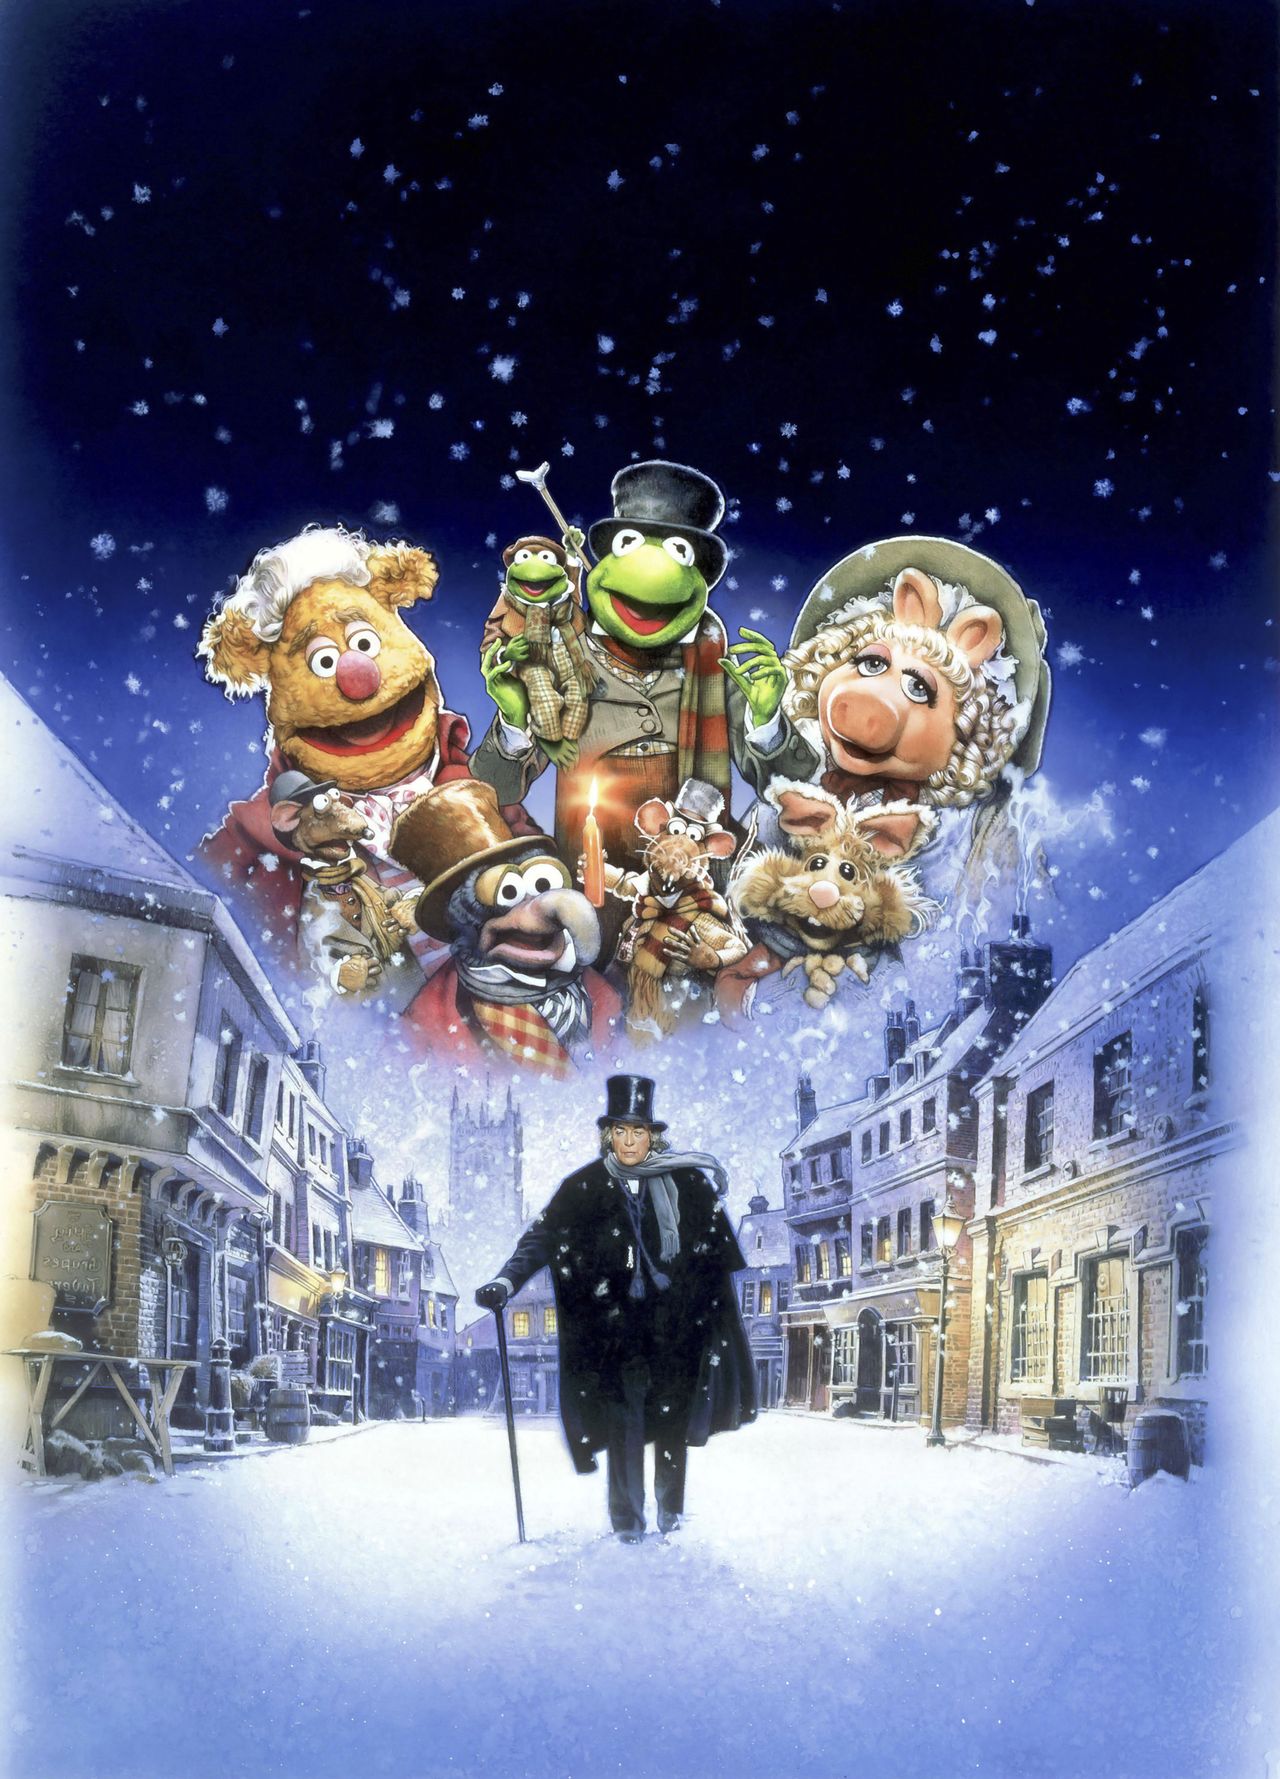 The poster for The Muppet Christmas Carol